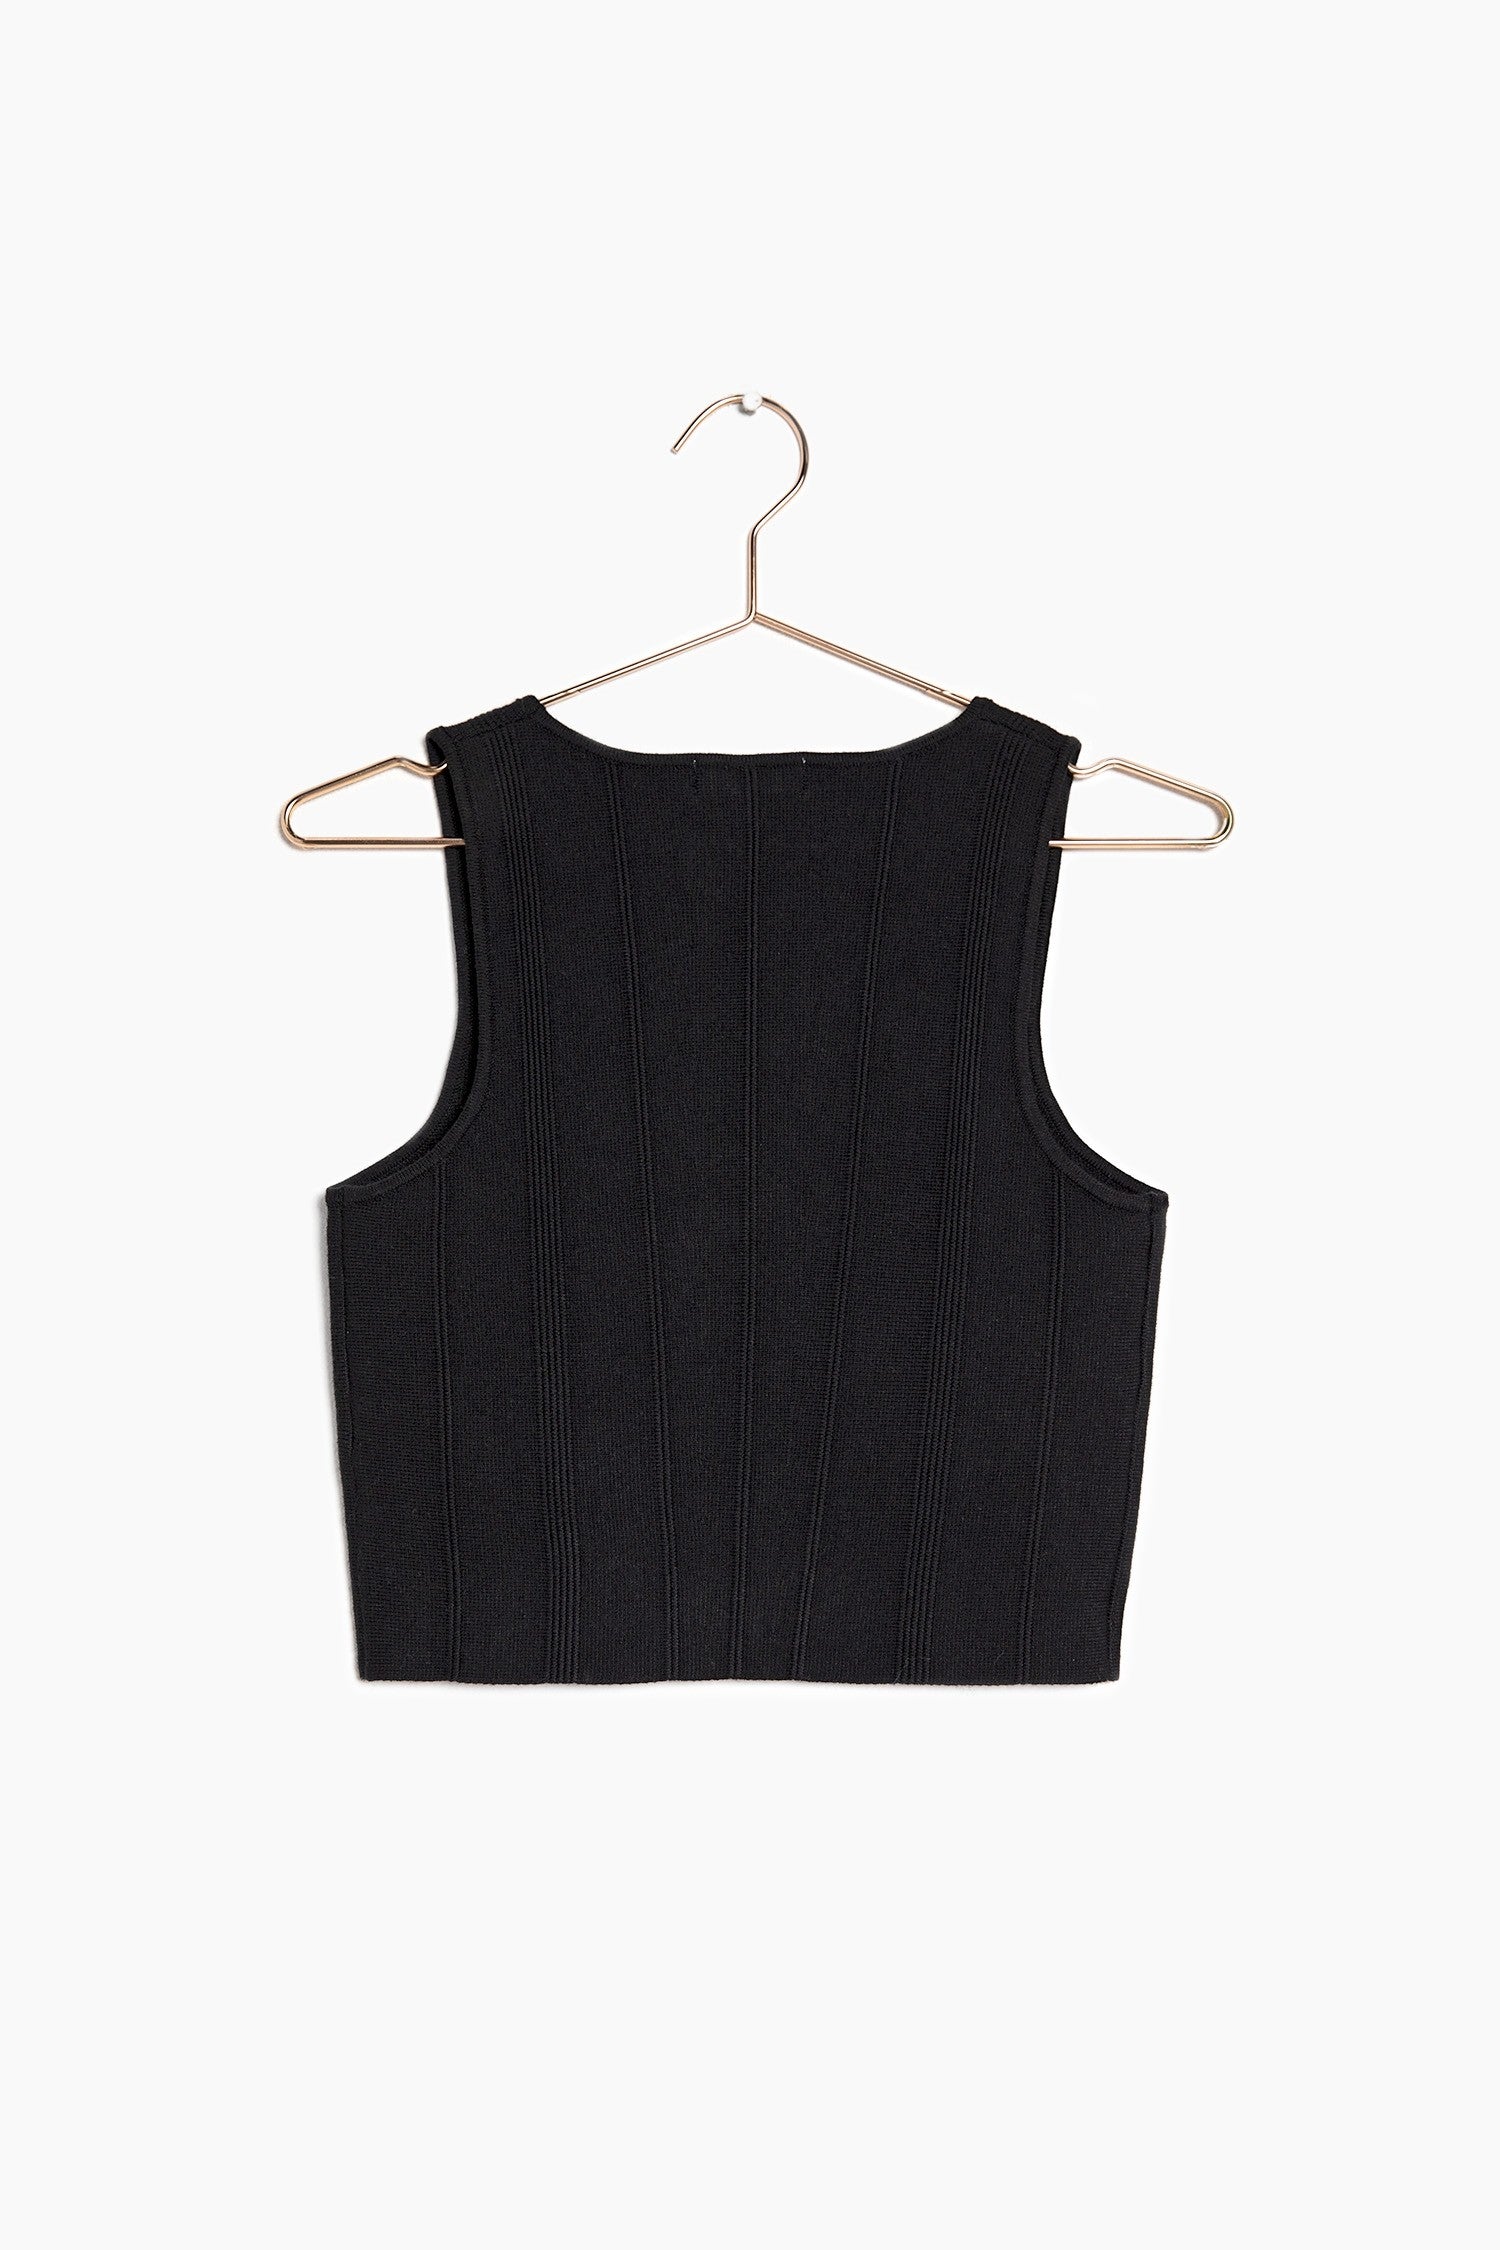 Back of the black crop top knit to show case how it look on a hanger and the detailing of the top.